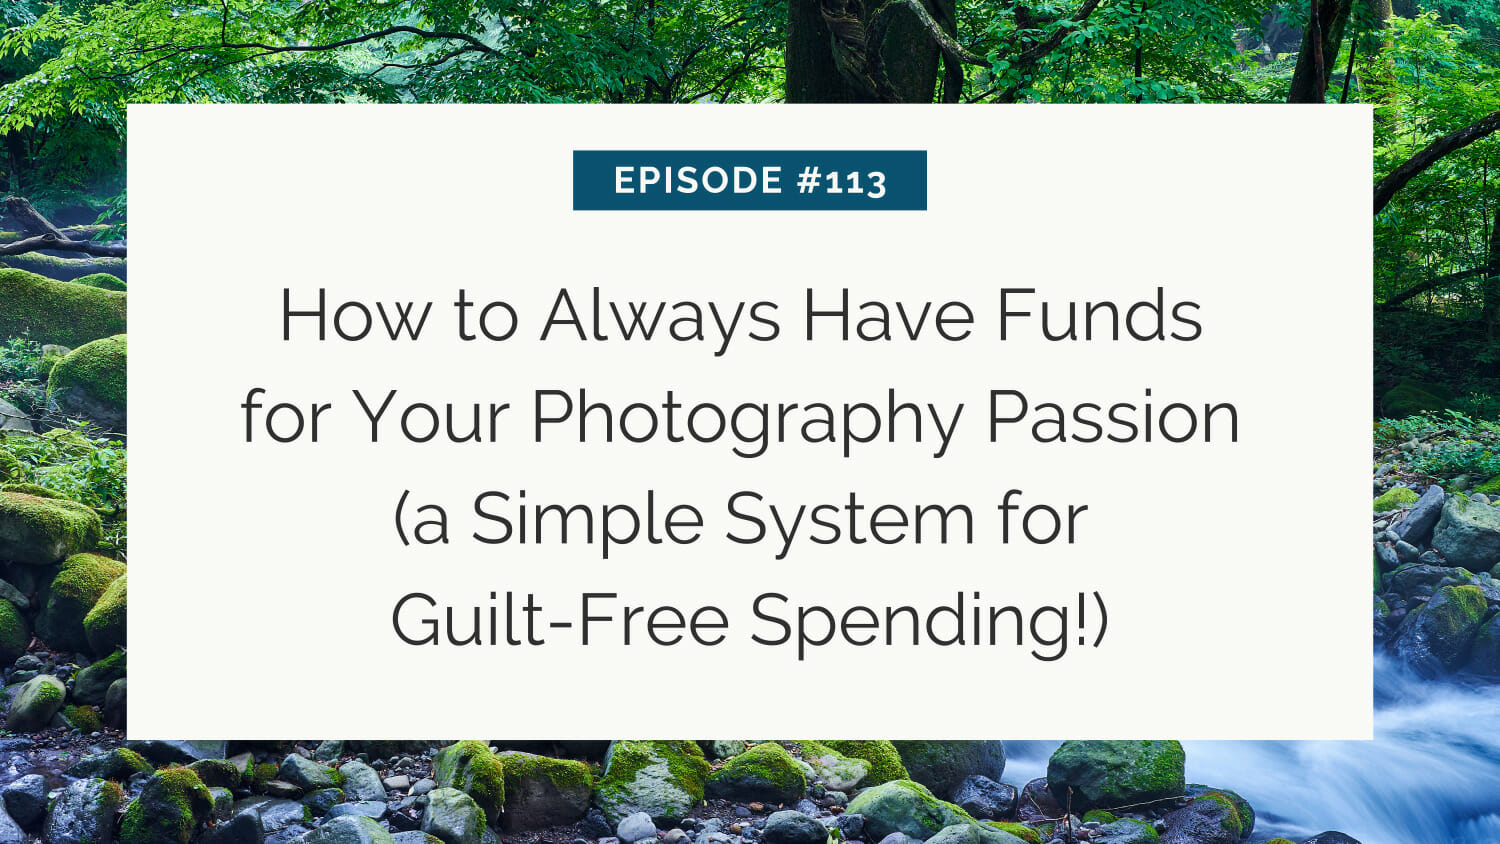 A tranquil forest stream accompanies text for episode #113 titled "how to always have funds for your photography passion (a simple system for guilt-free spending!).